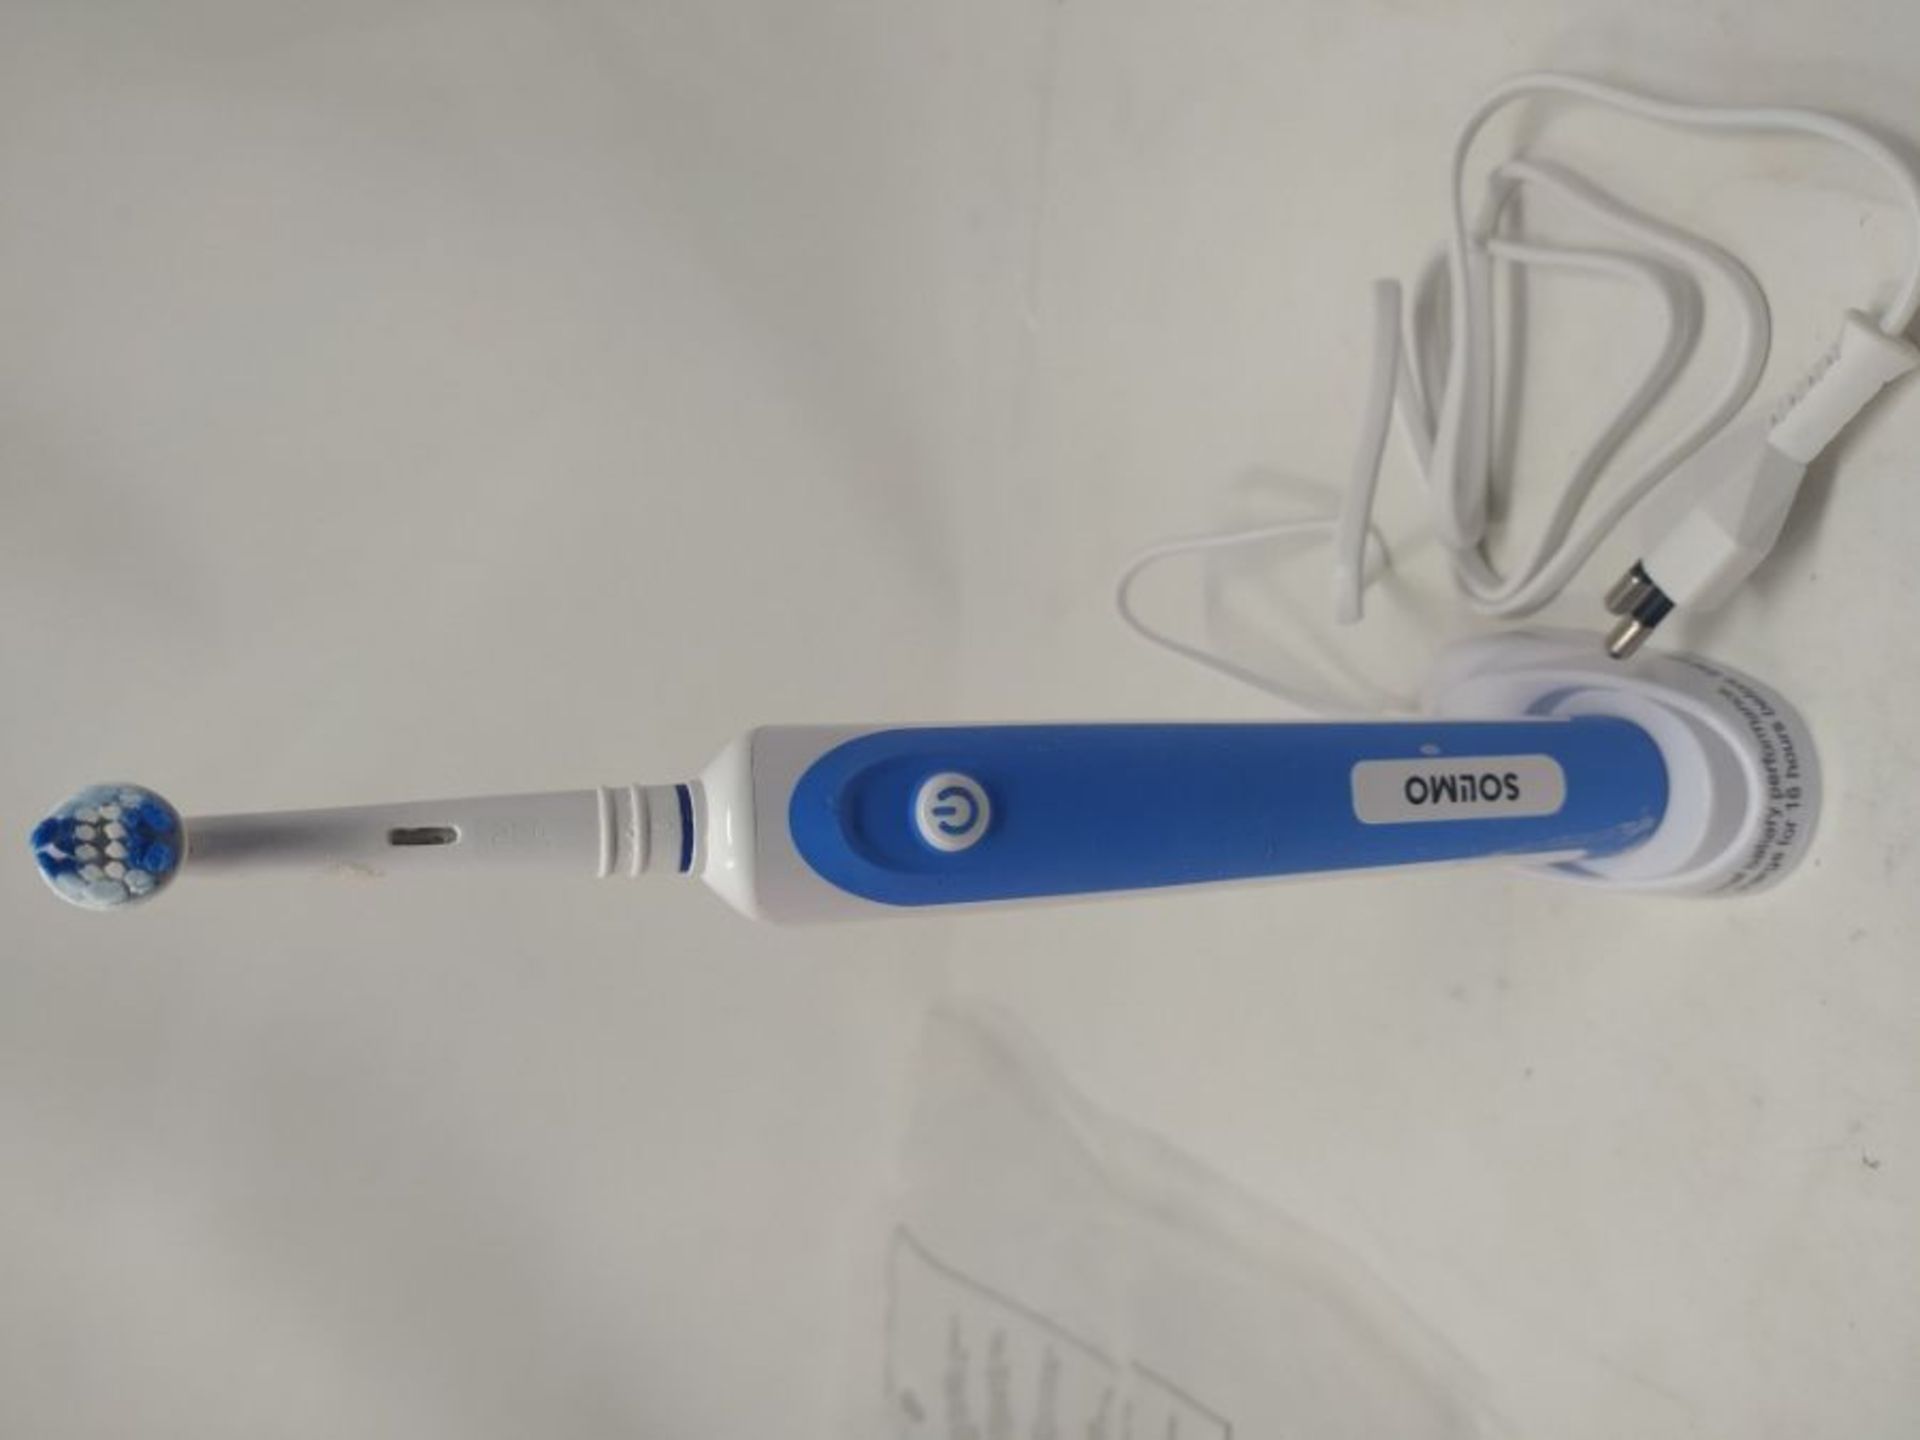 Amazon Brand - Solimo Electric Rechargeable Toothbrush + 2 Clean Plus Brush Heads (wit - Image 2 of 2